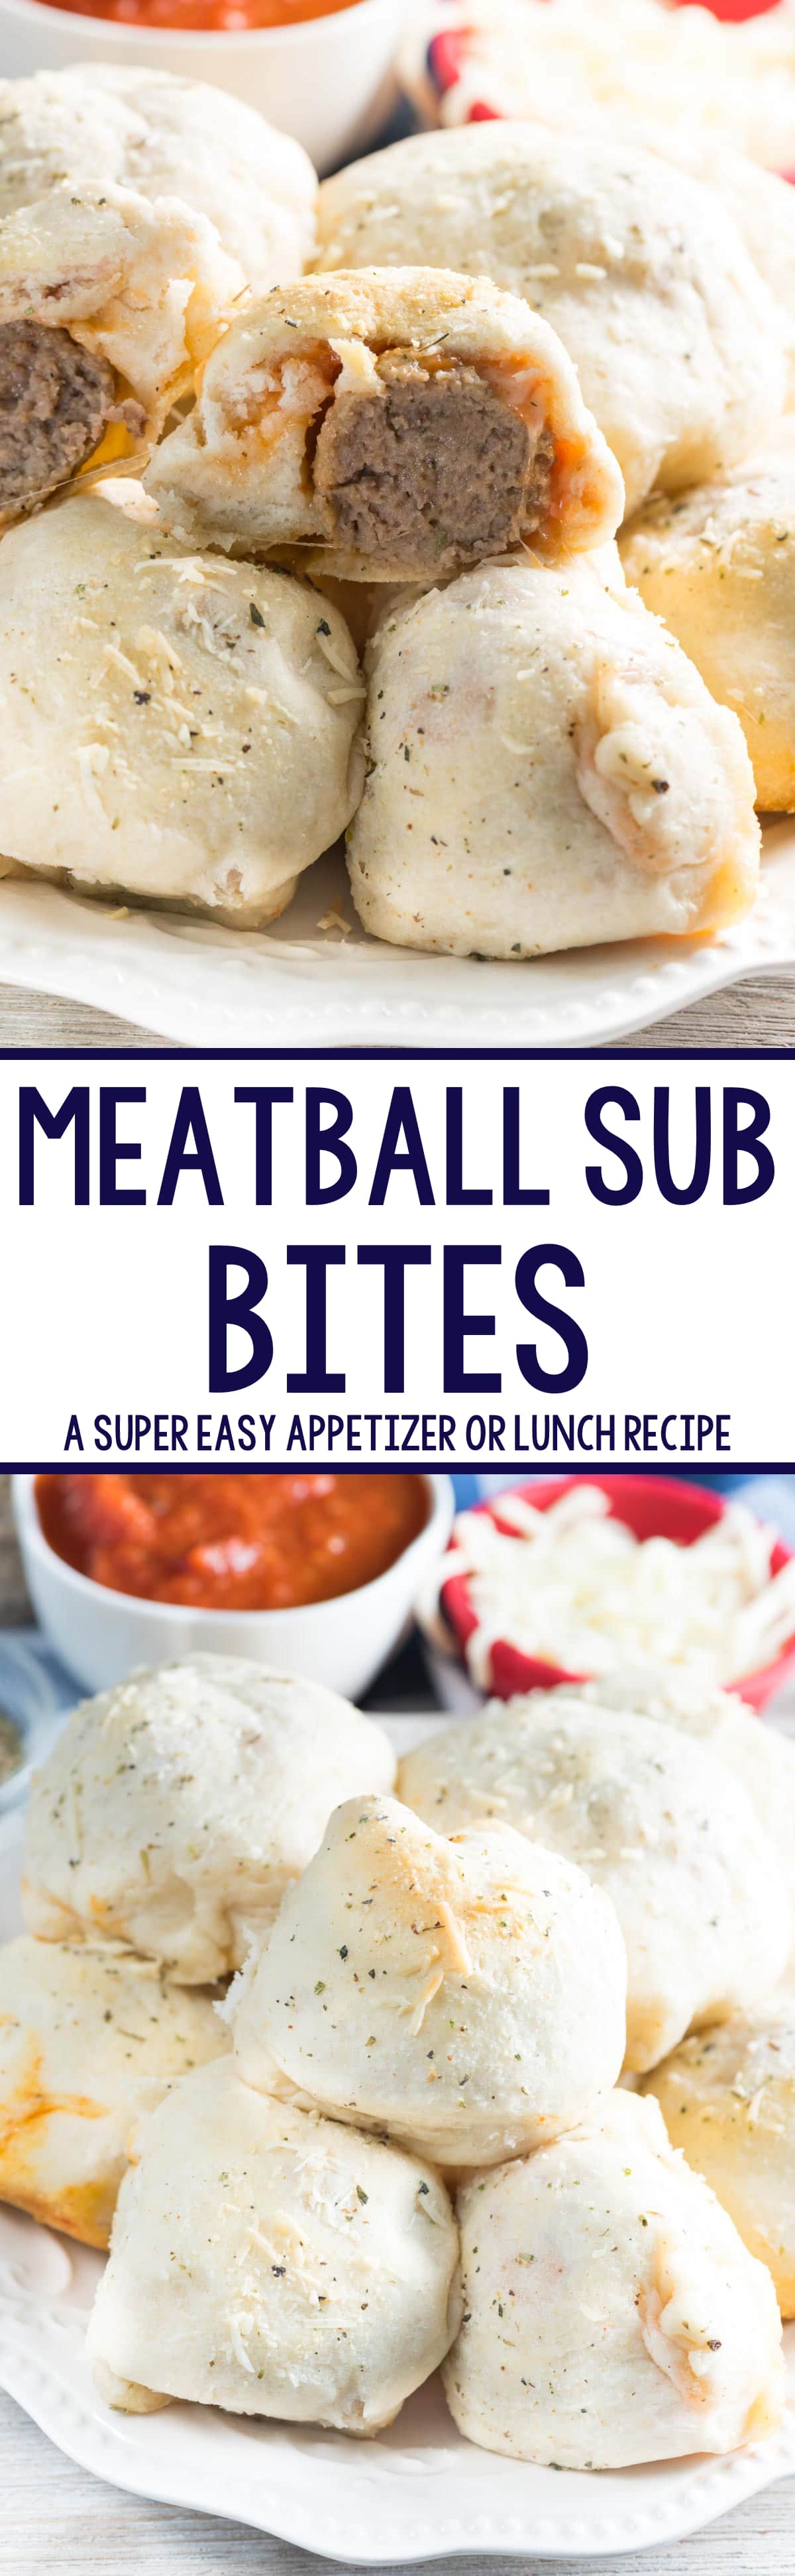 Meatball Sub Bites - this easy appetizer recipe has just 4 main ingredients and is perfect for a party or lunch. Wrap frozen meatballs in biscuit dough for a handheld meatball sub in a bite!